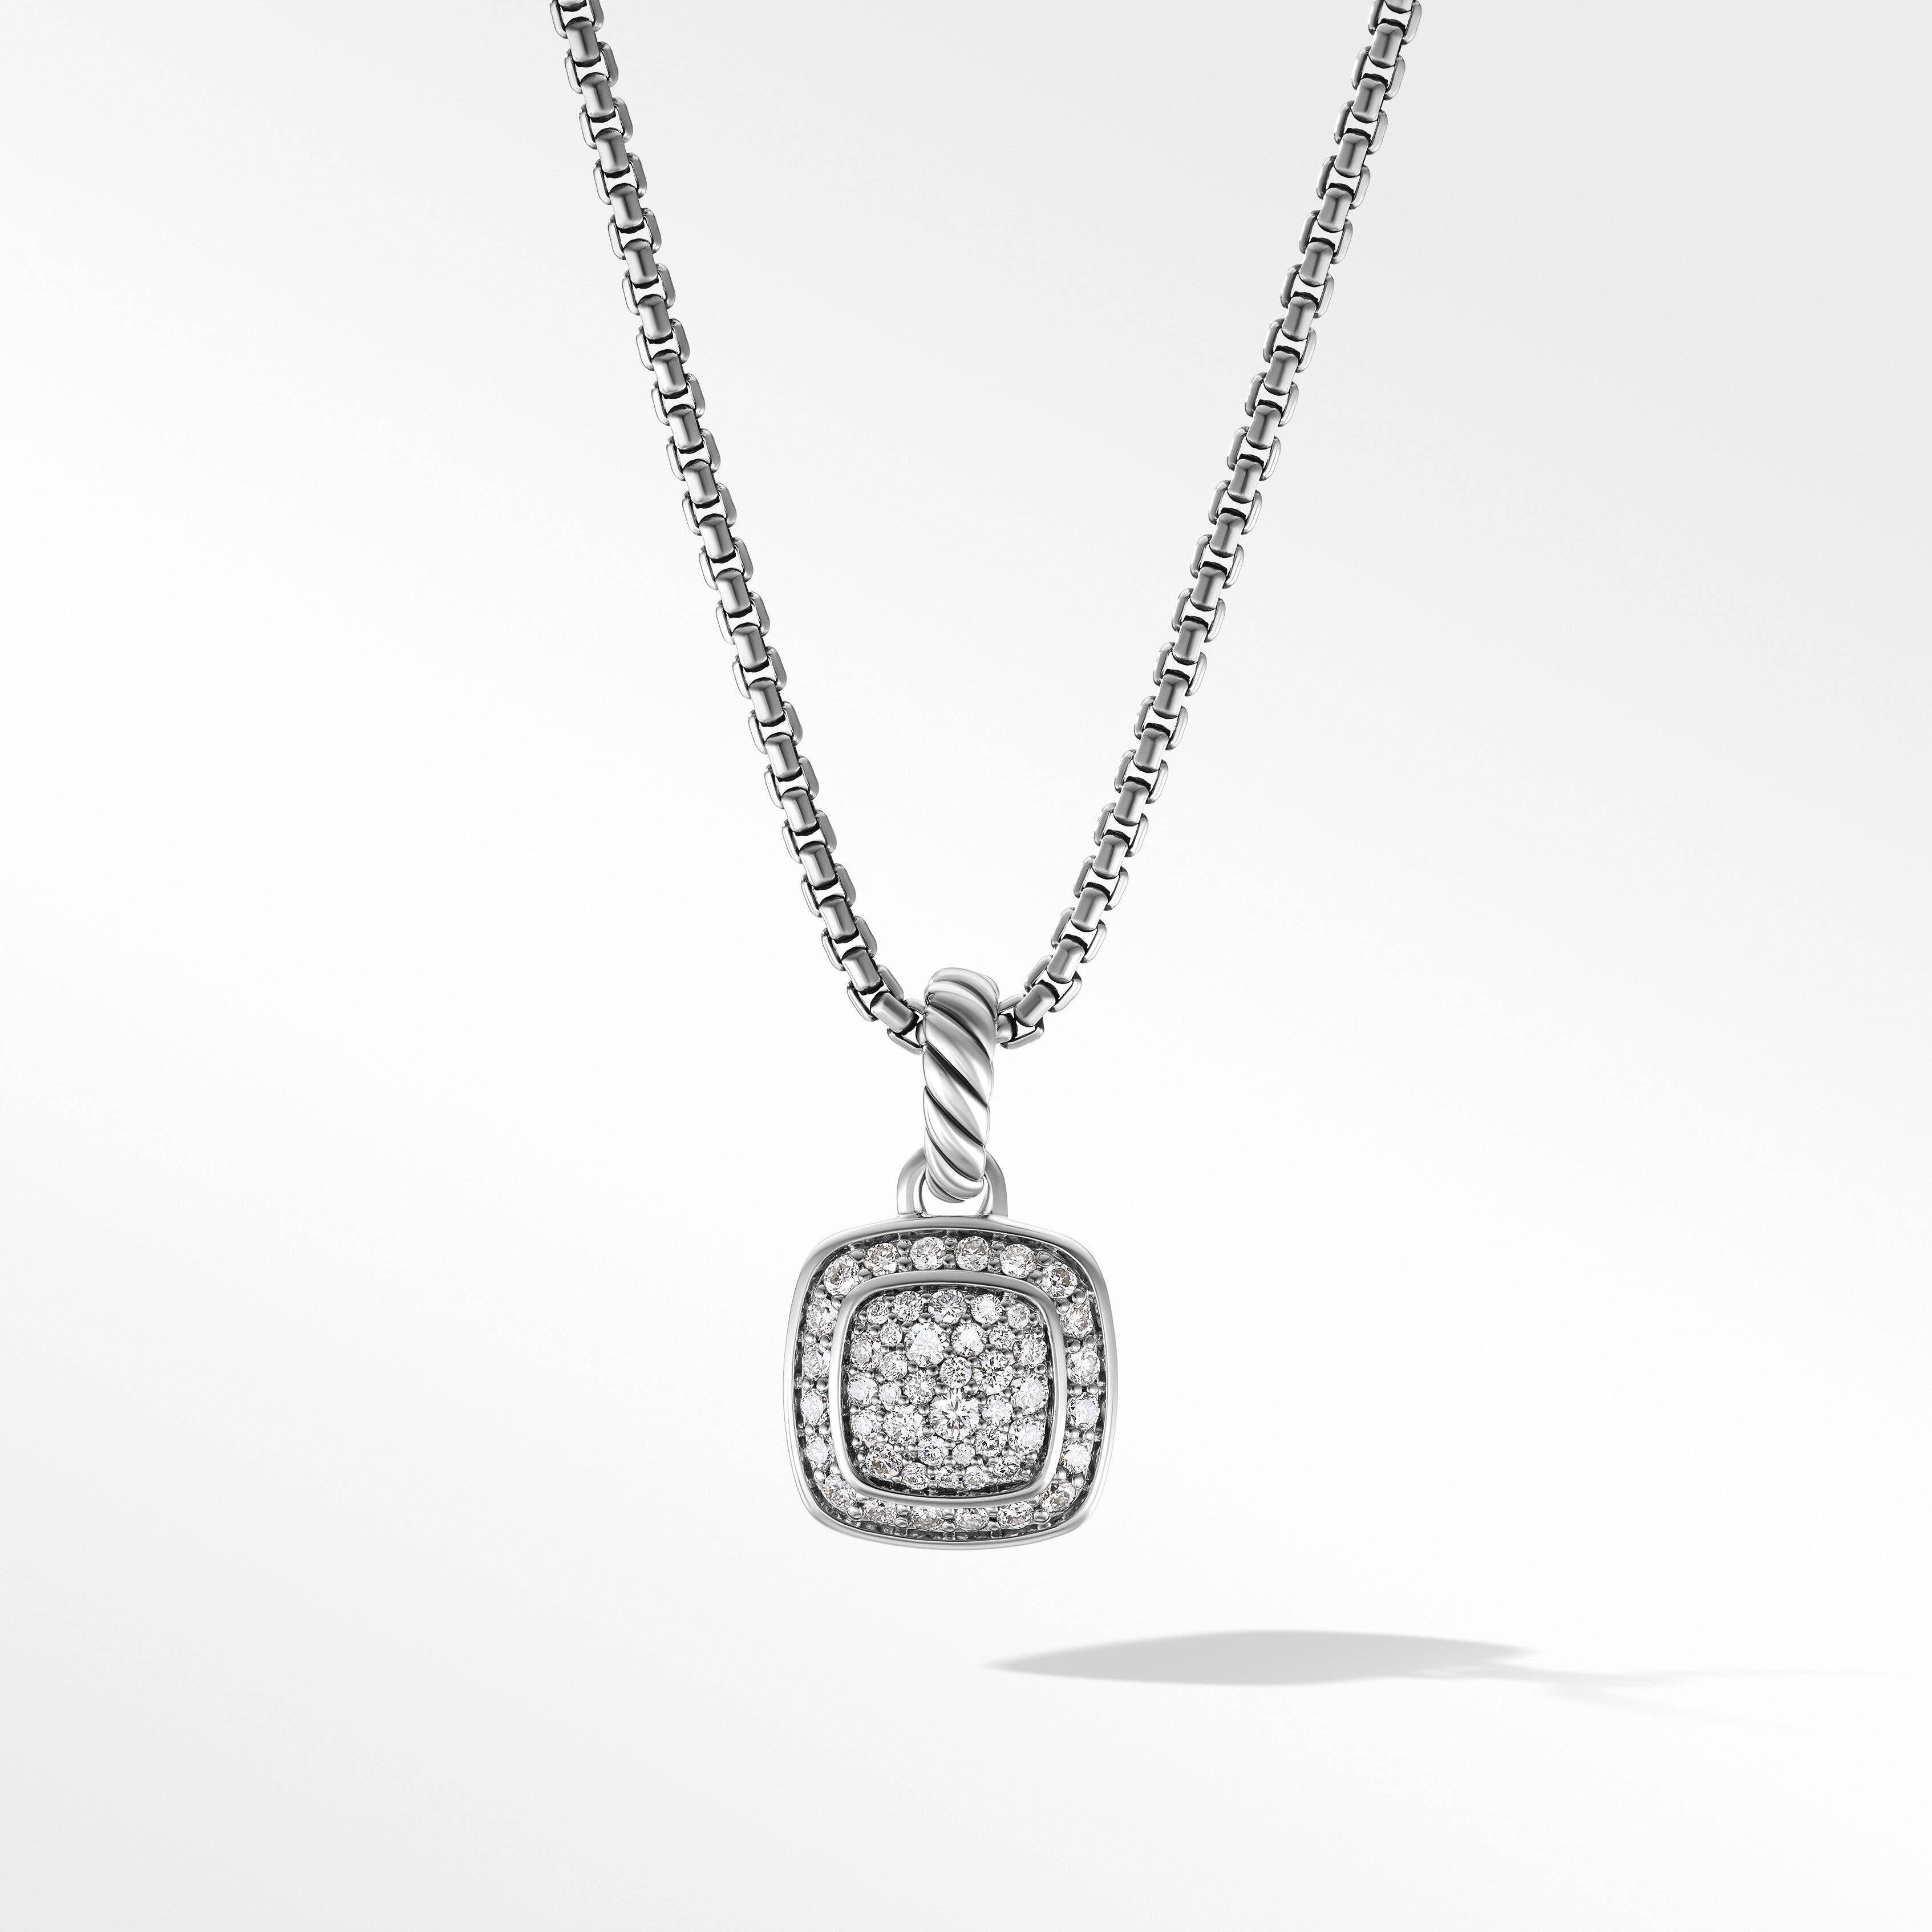 Petite Albion® Pendant Necklace in Sterling Silver with Pavé Diamonds